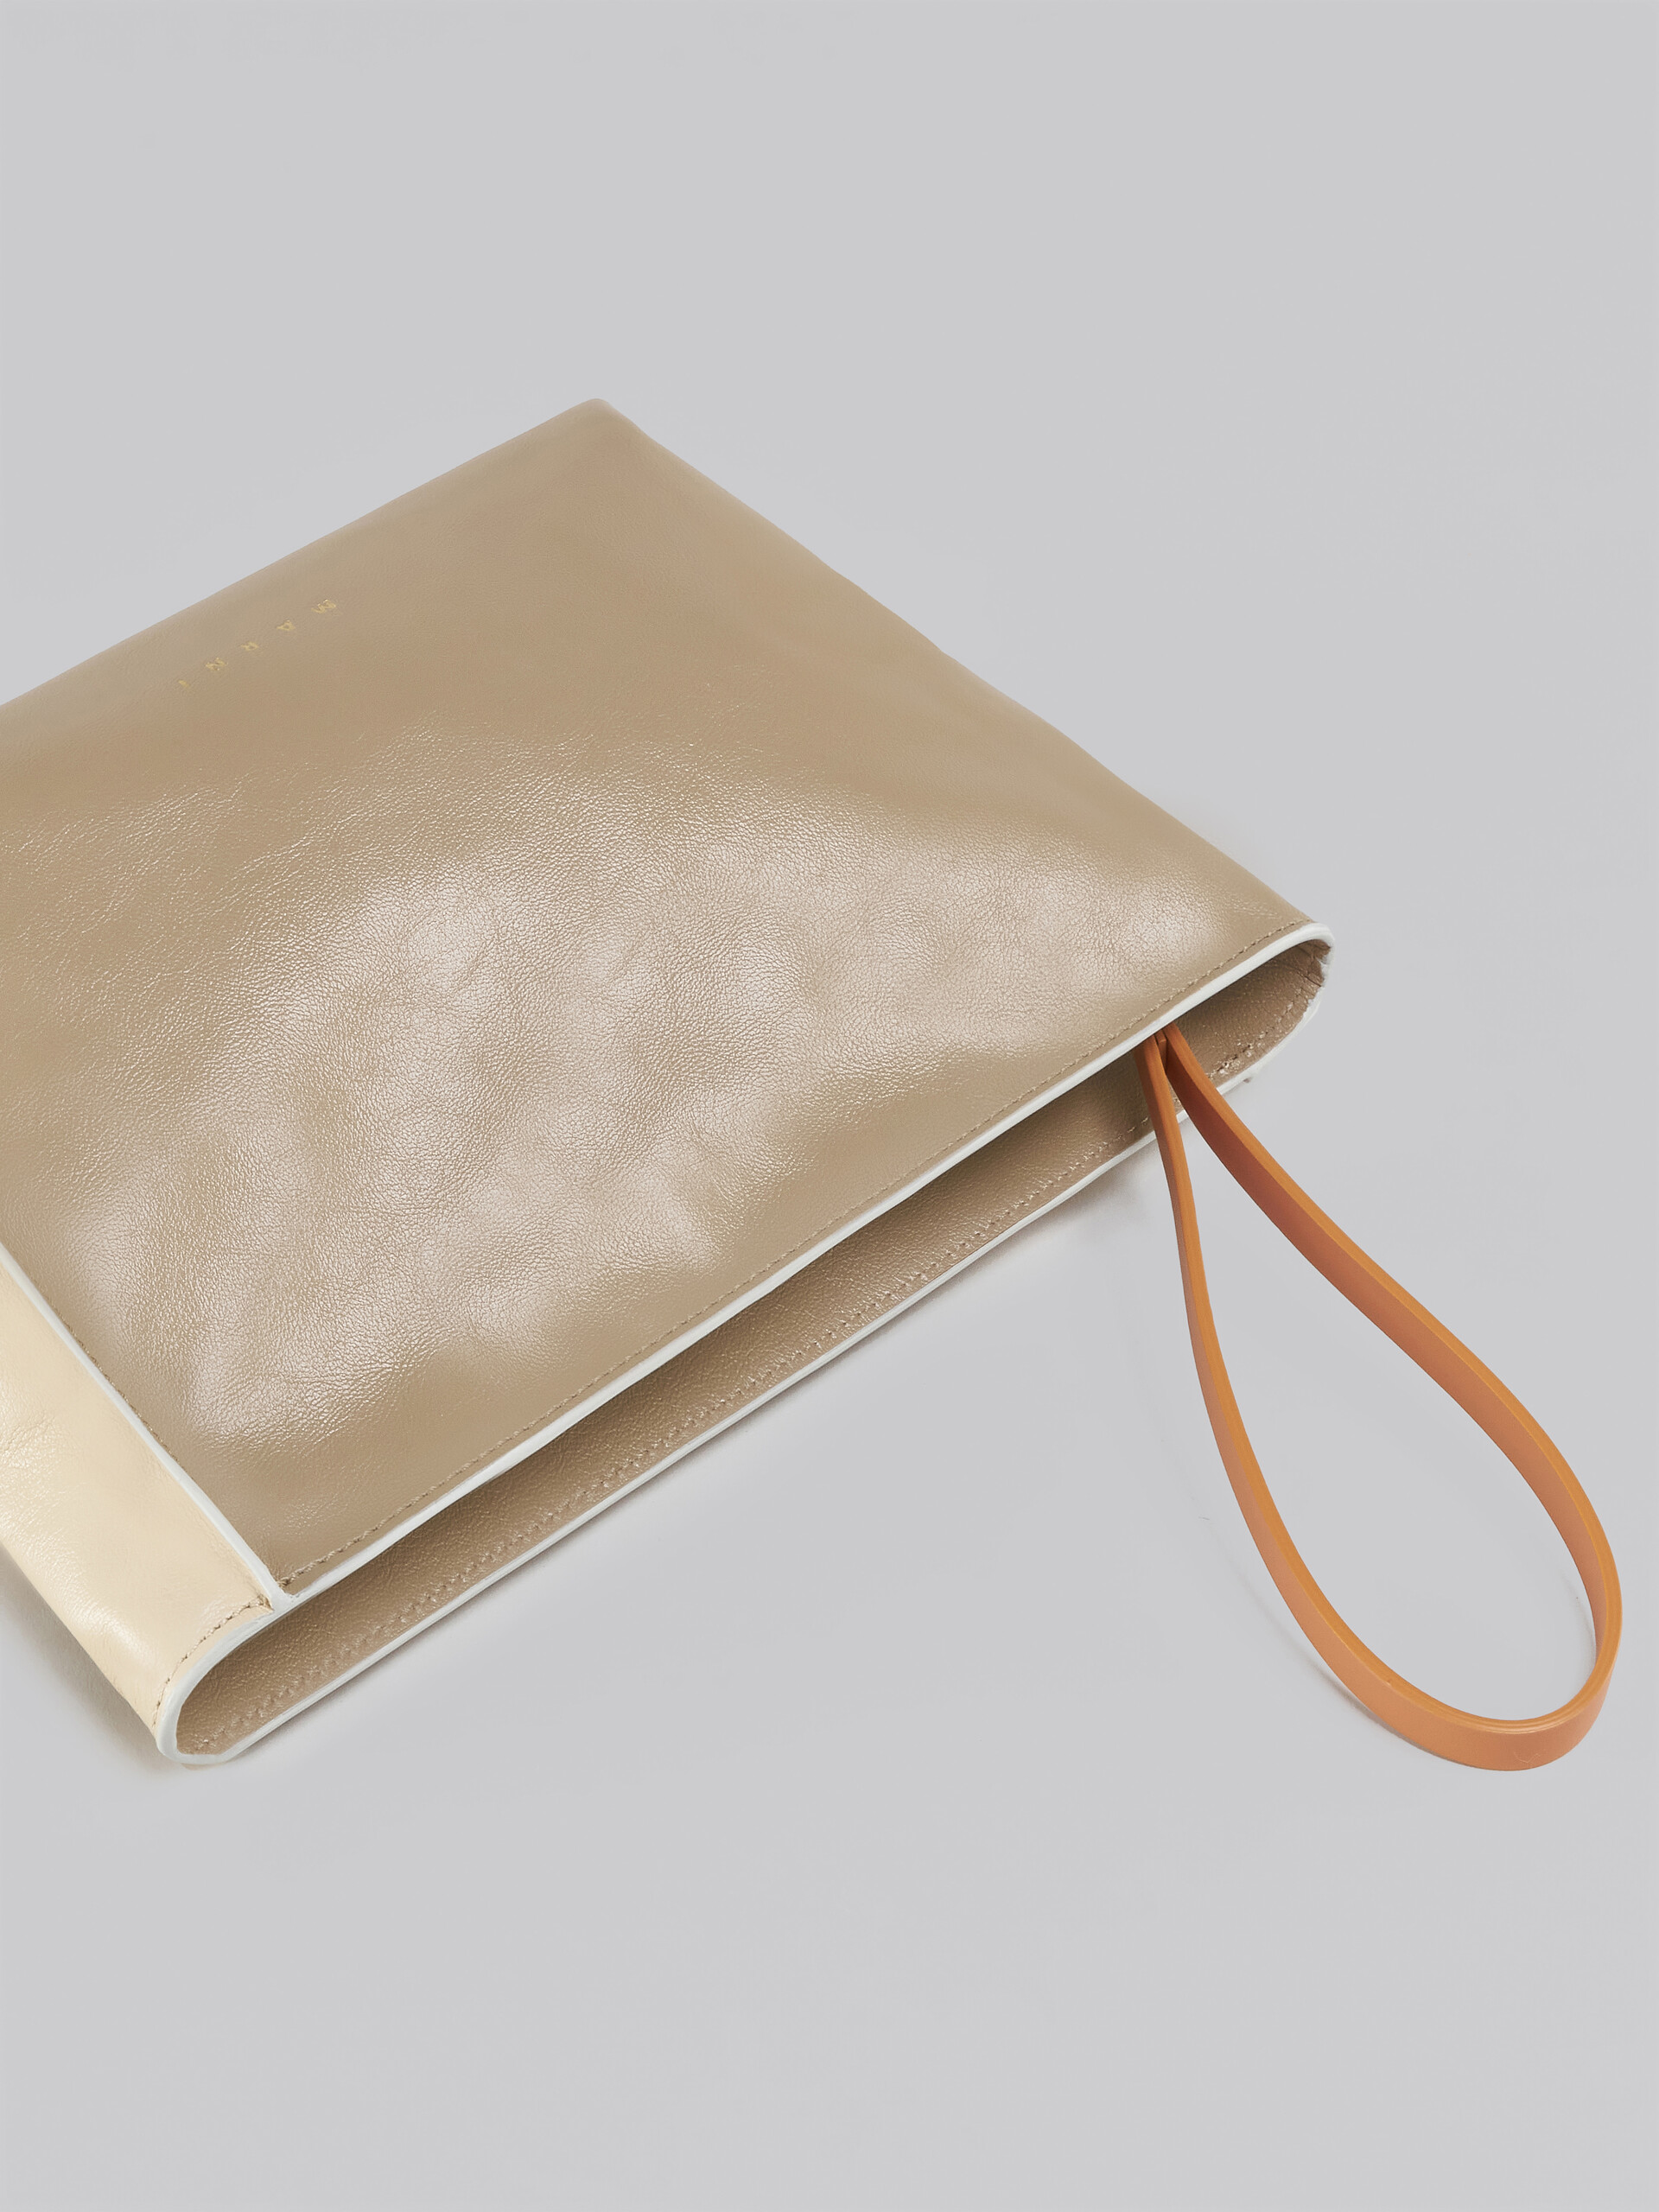 Museo Soft Clutch in grey-green beige and brown leather - Pochette - Image 5